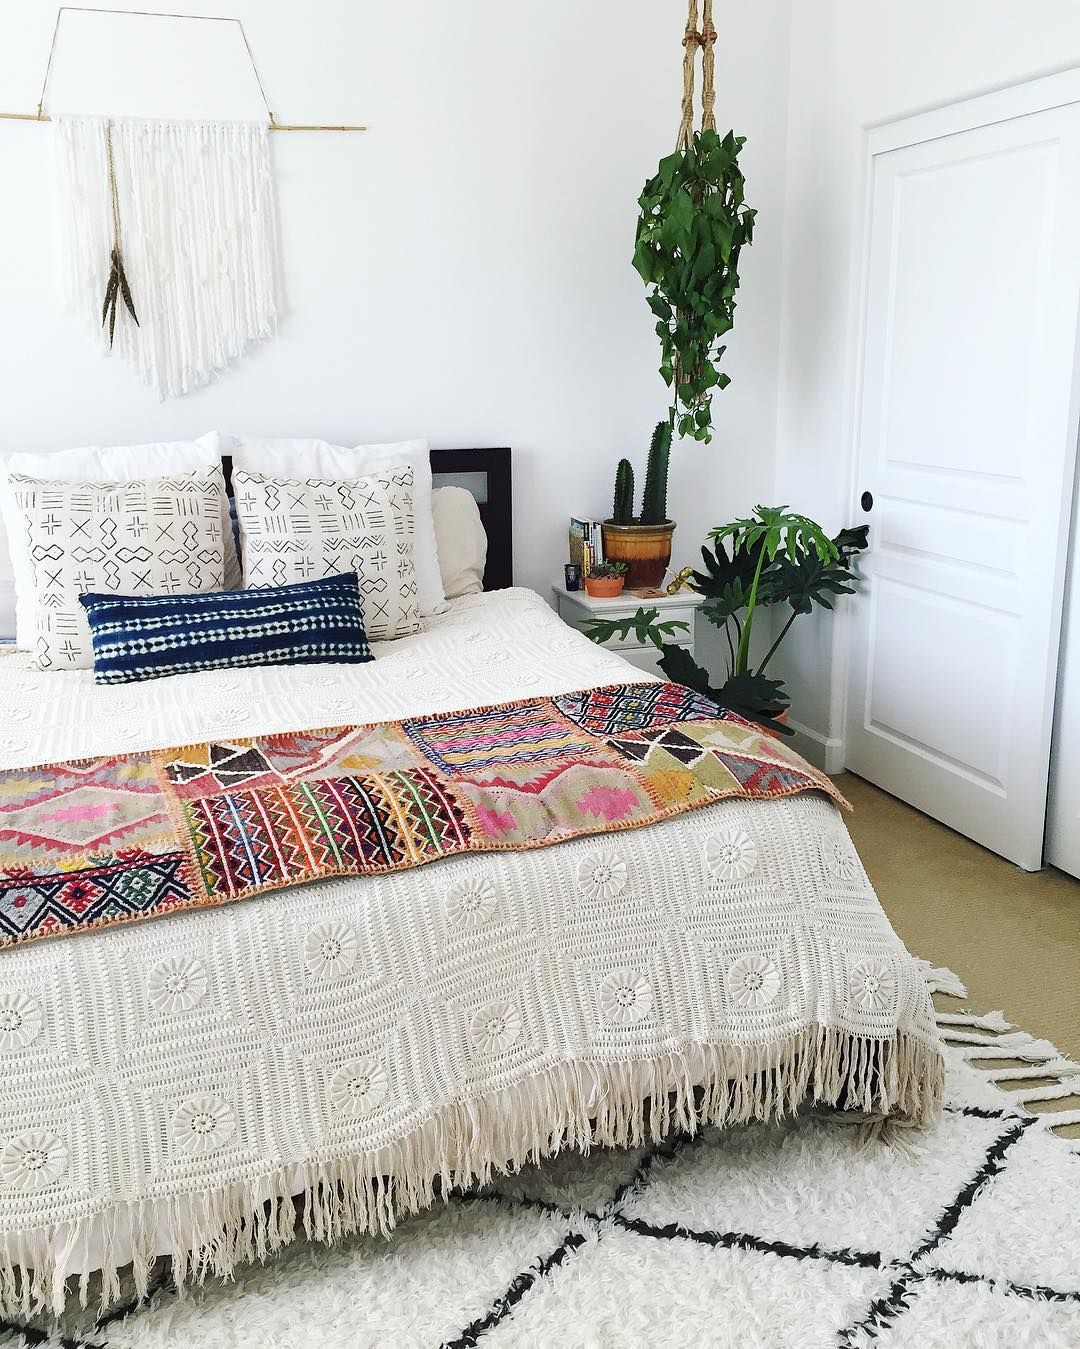 15 Bohemian Bedrooms With Free Spirit Vibes